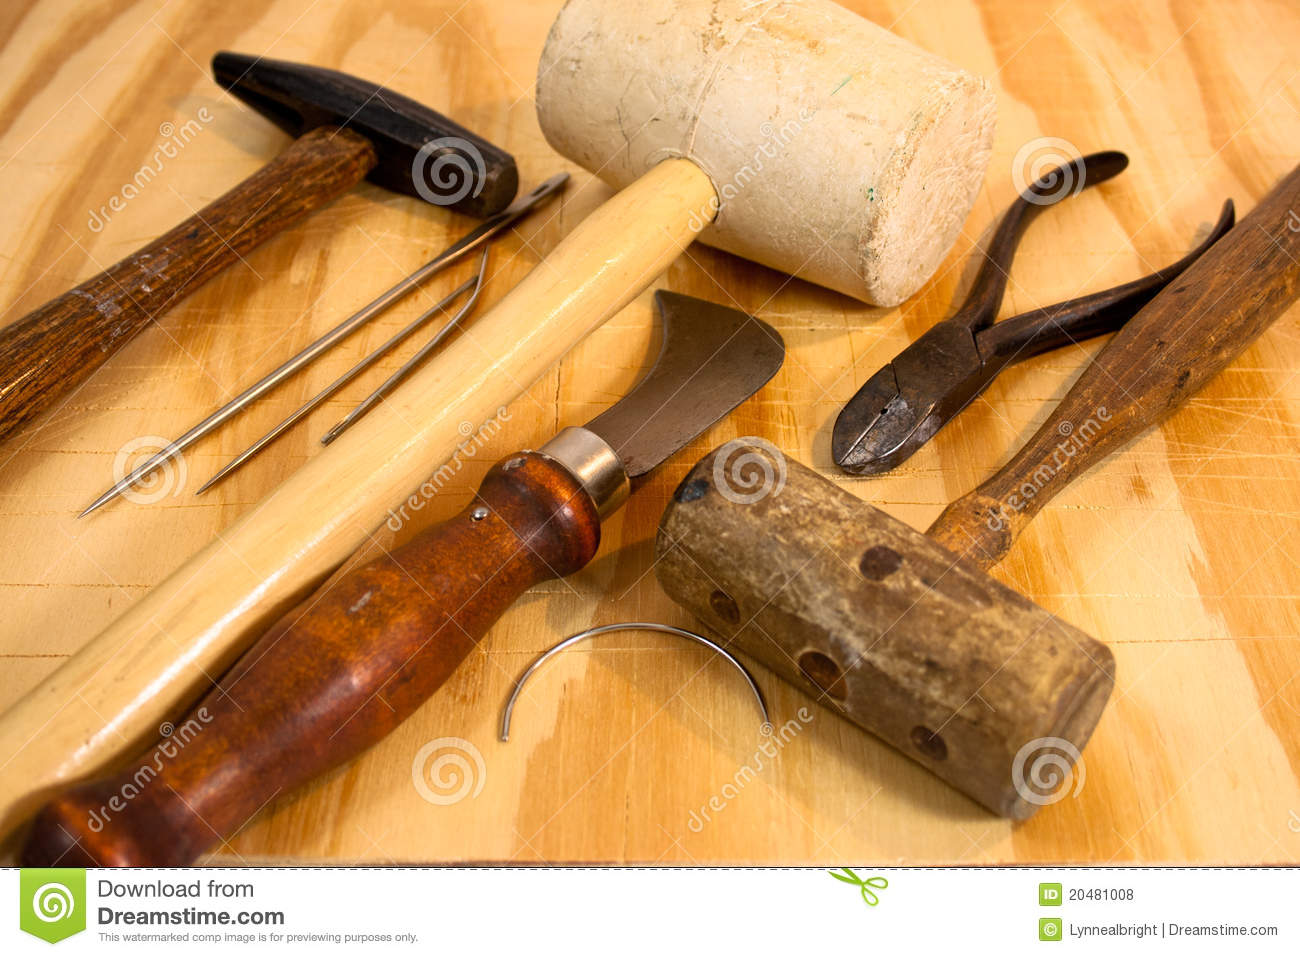 An Assortment Of Old Hand Tools Used In Upholstery Including Hammers